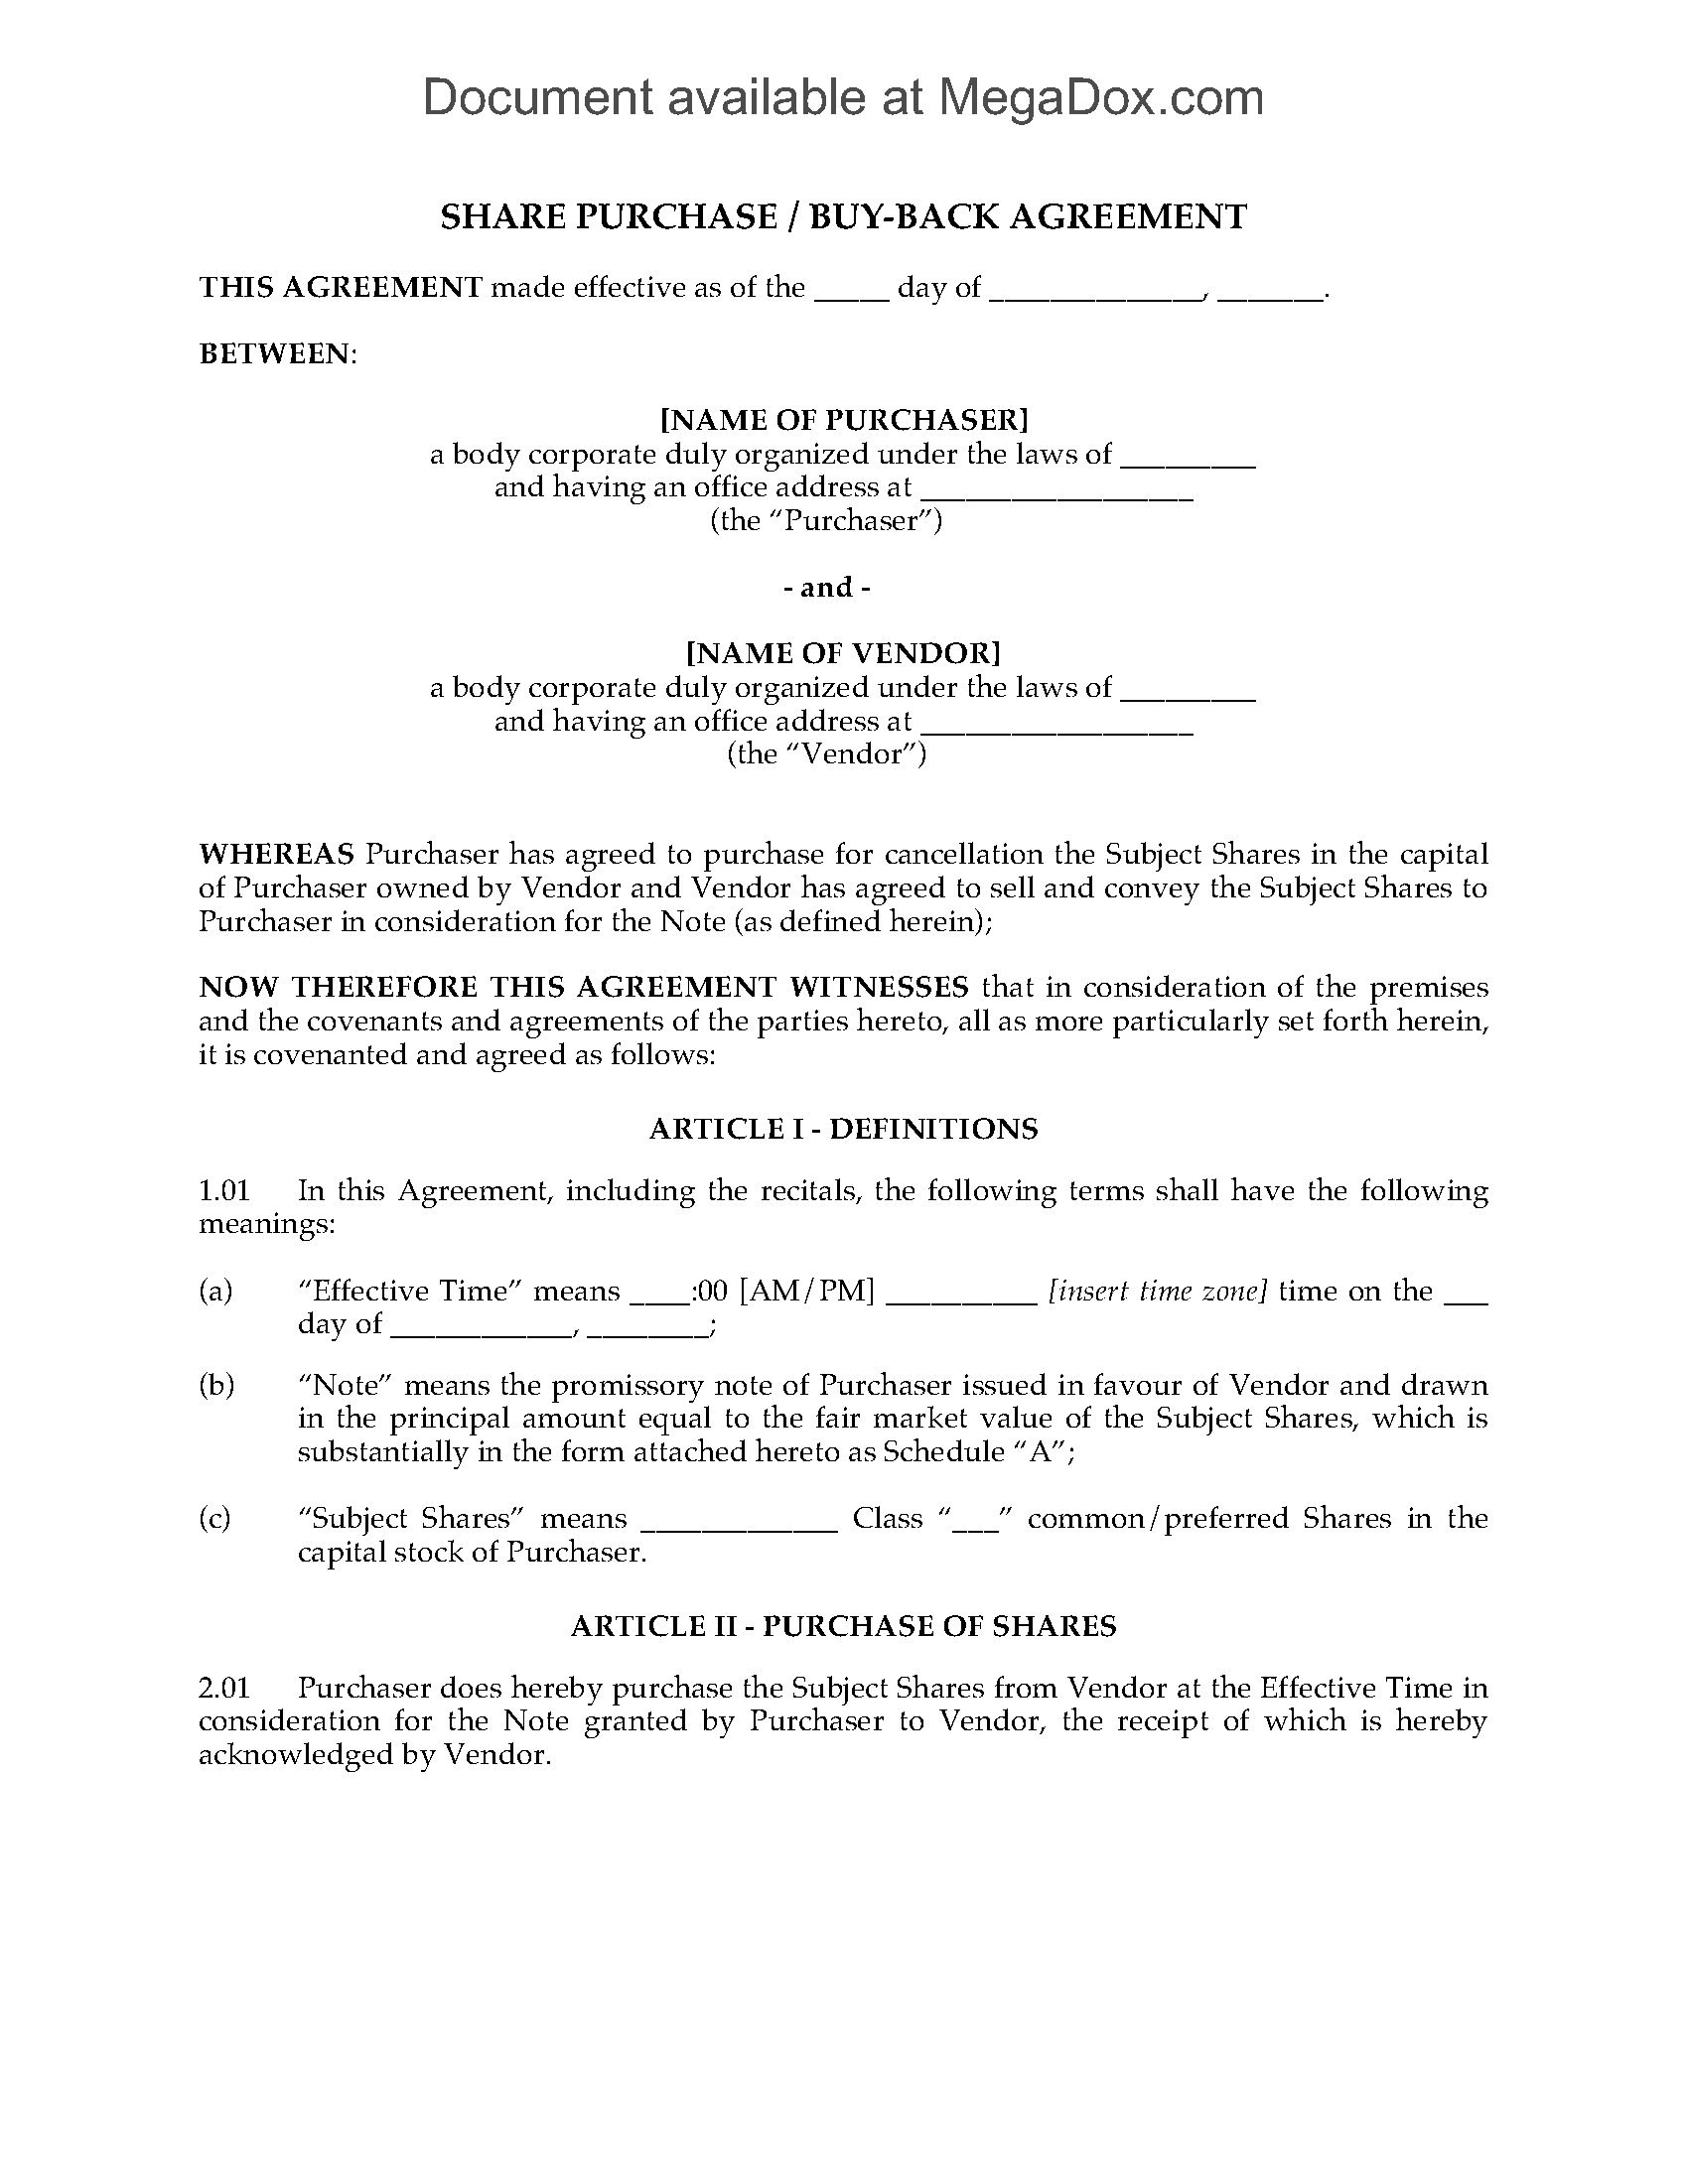 Share Repurchase Buyback Agreement  Legal Forms And Business throughout Share Buy Back Agreement Template